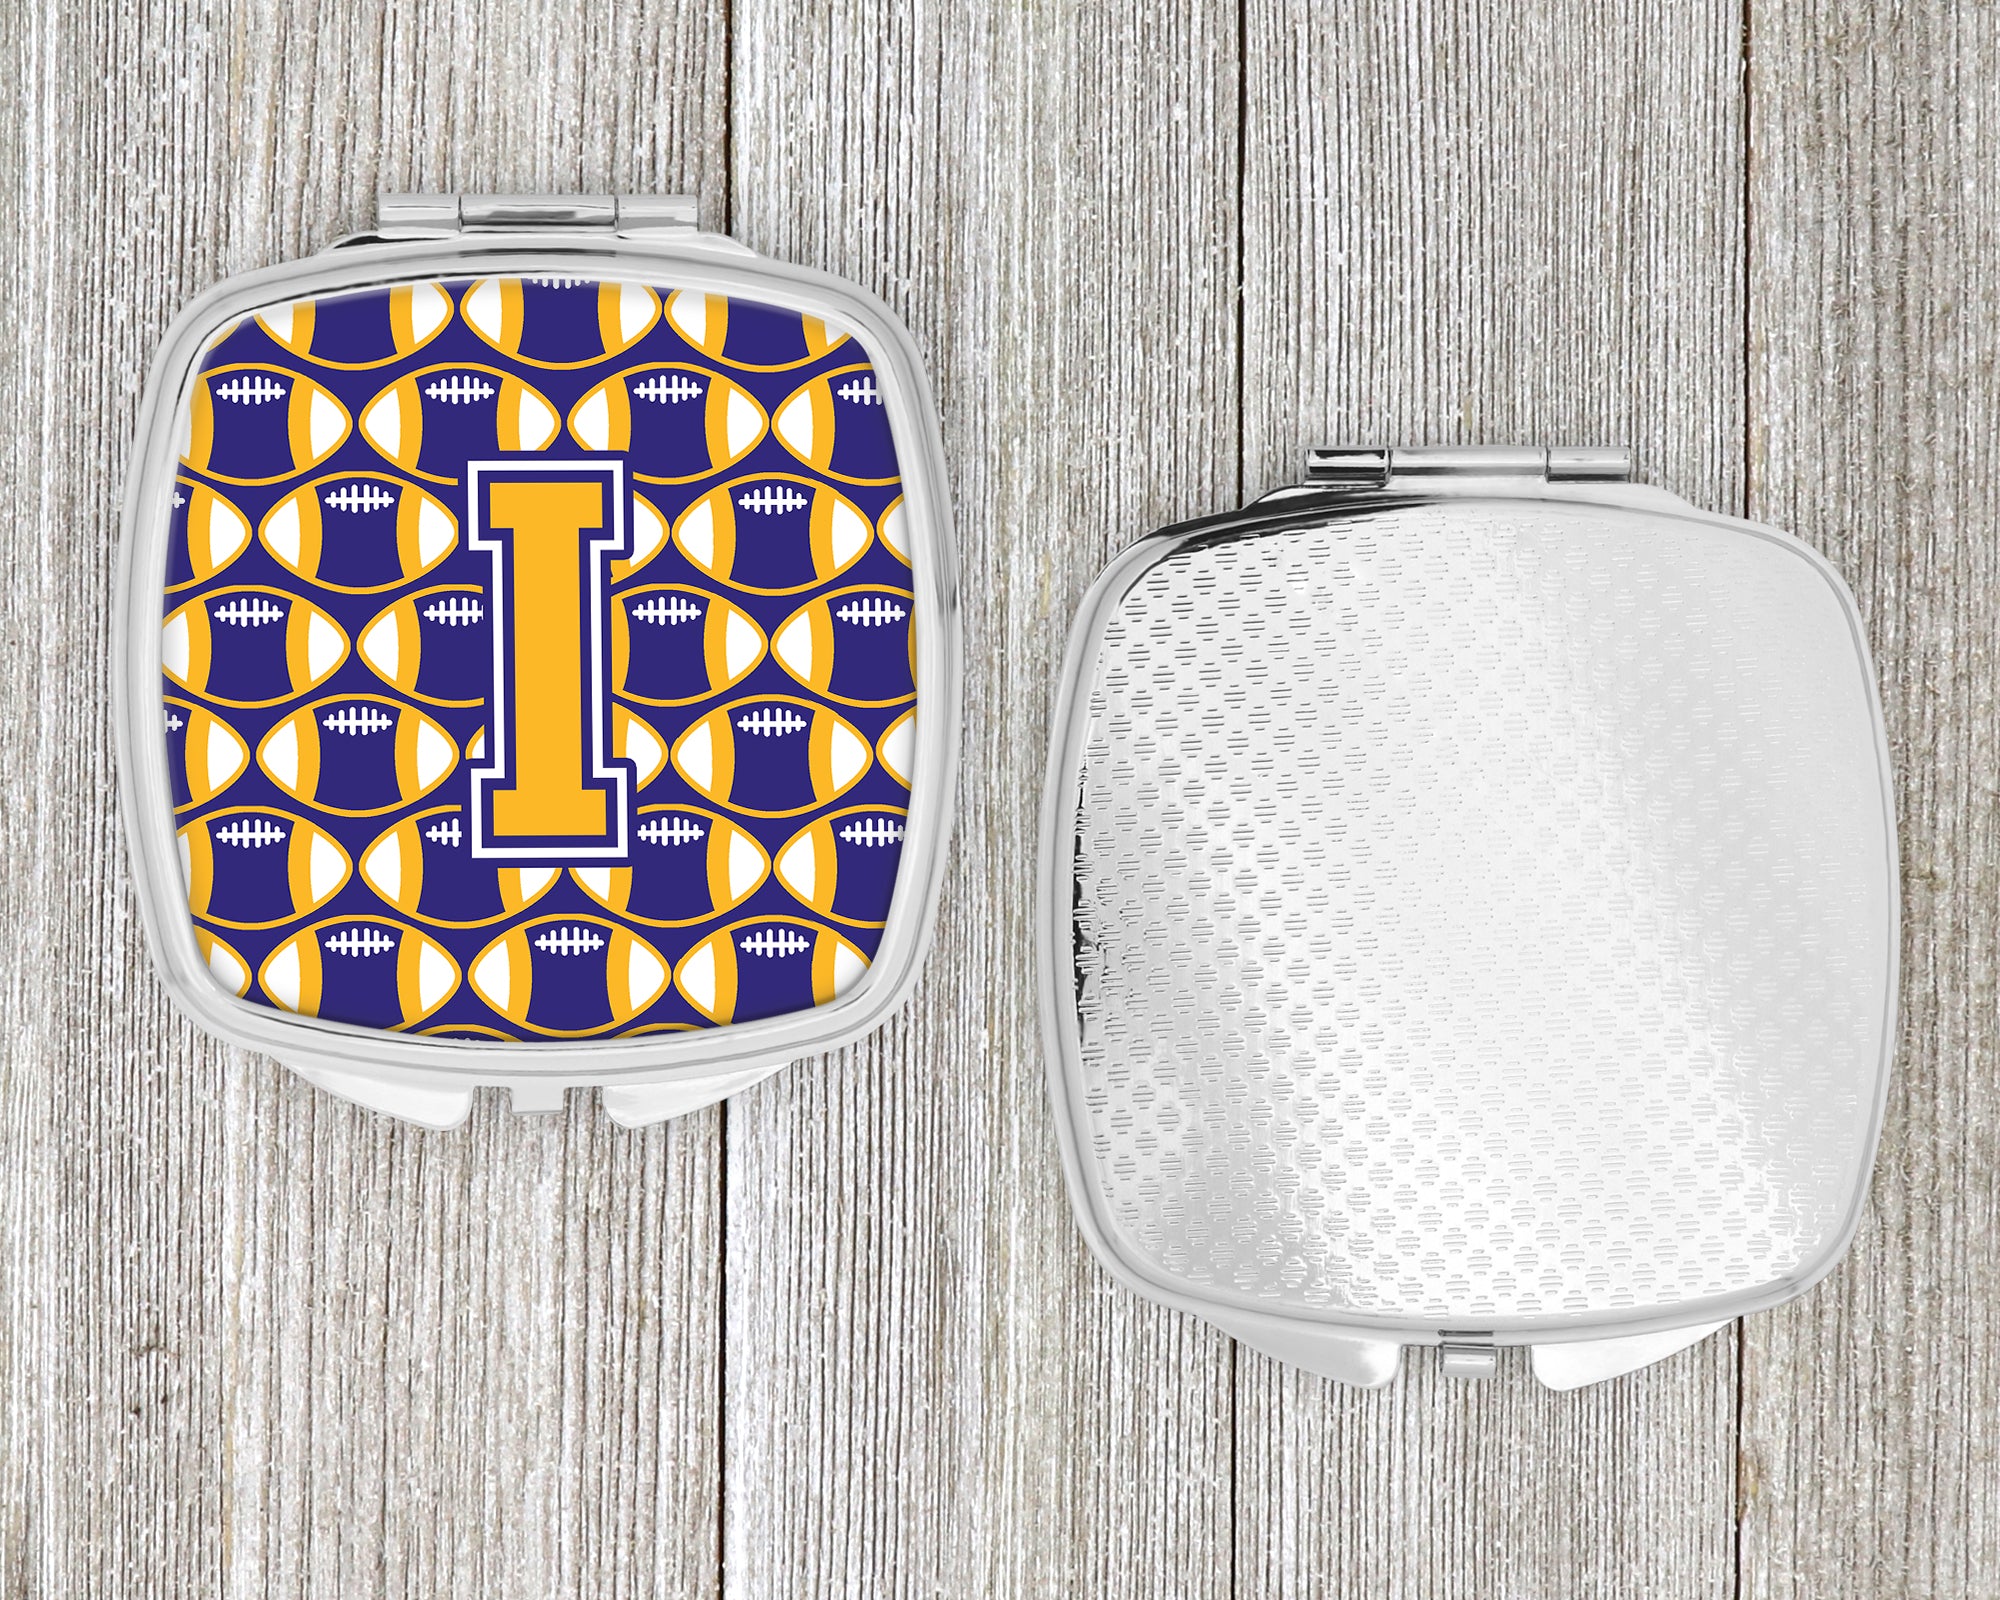 Letter I Football Purple and Gold Compact Mirror CJ1064-ISCM